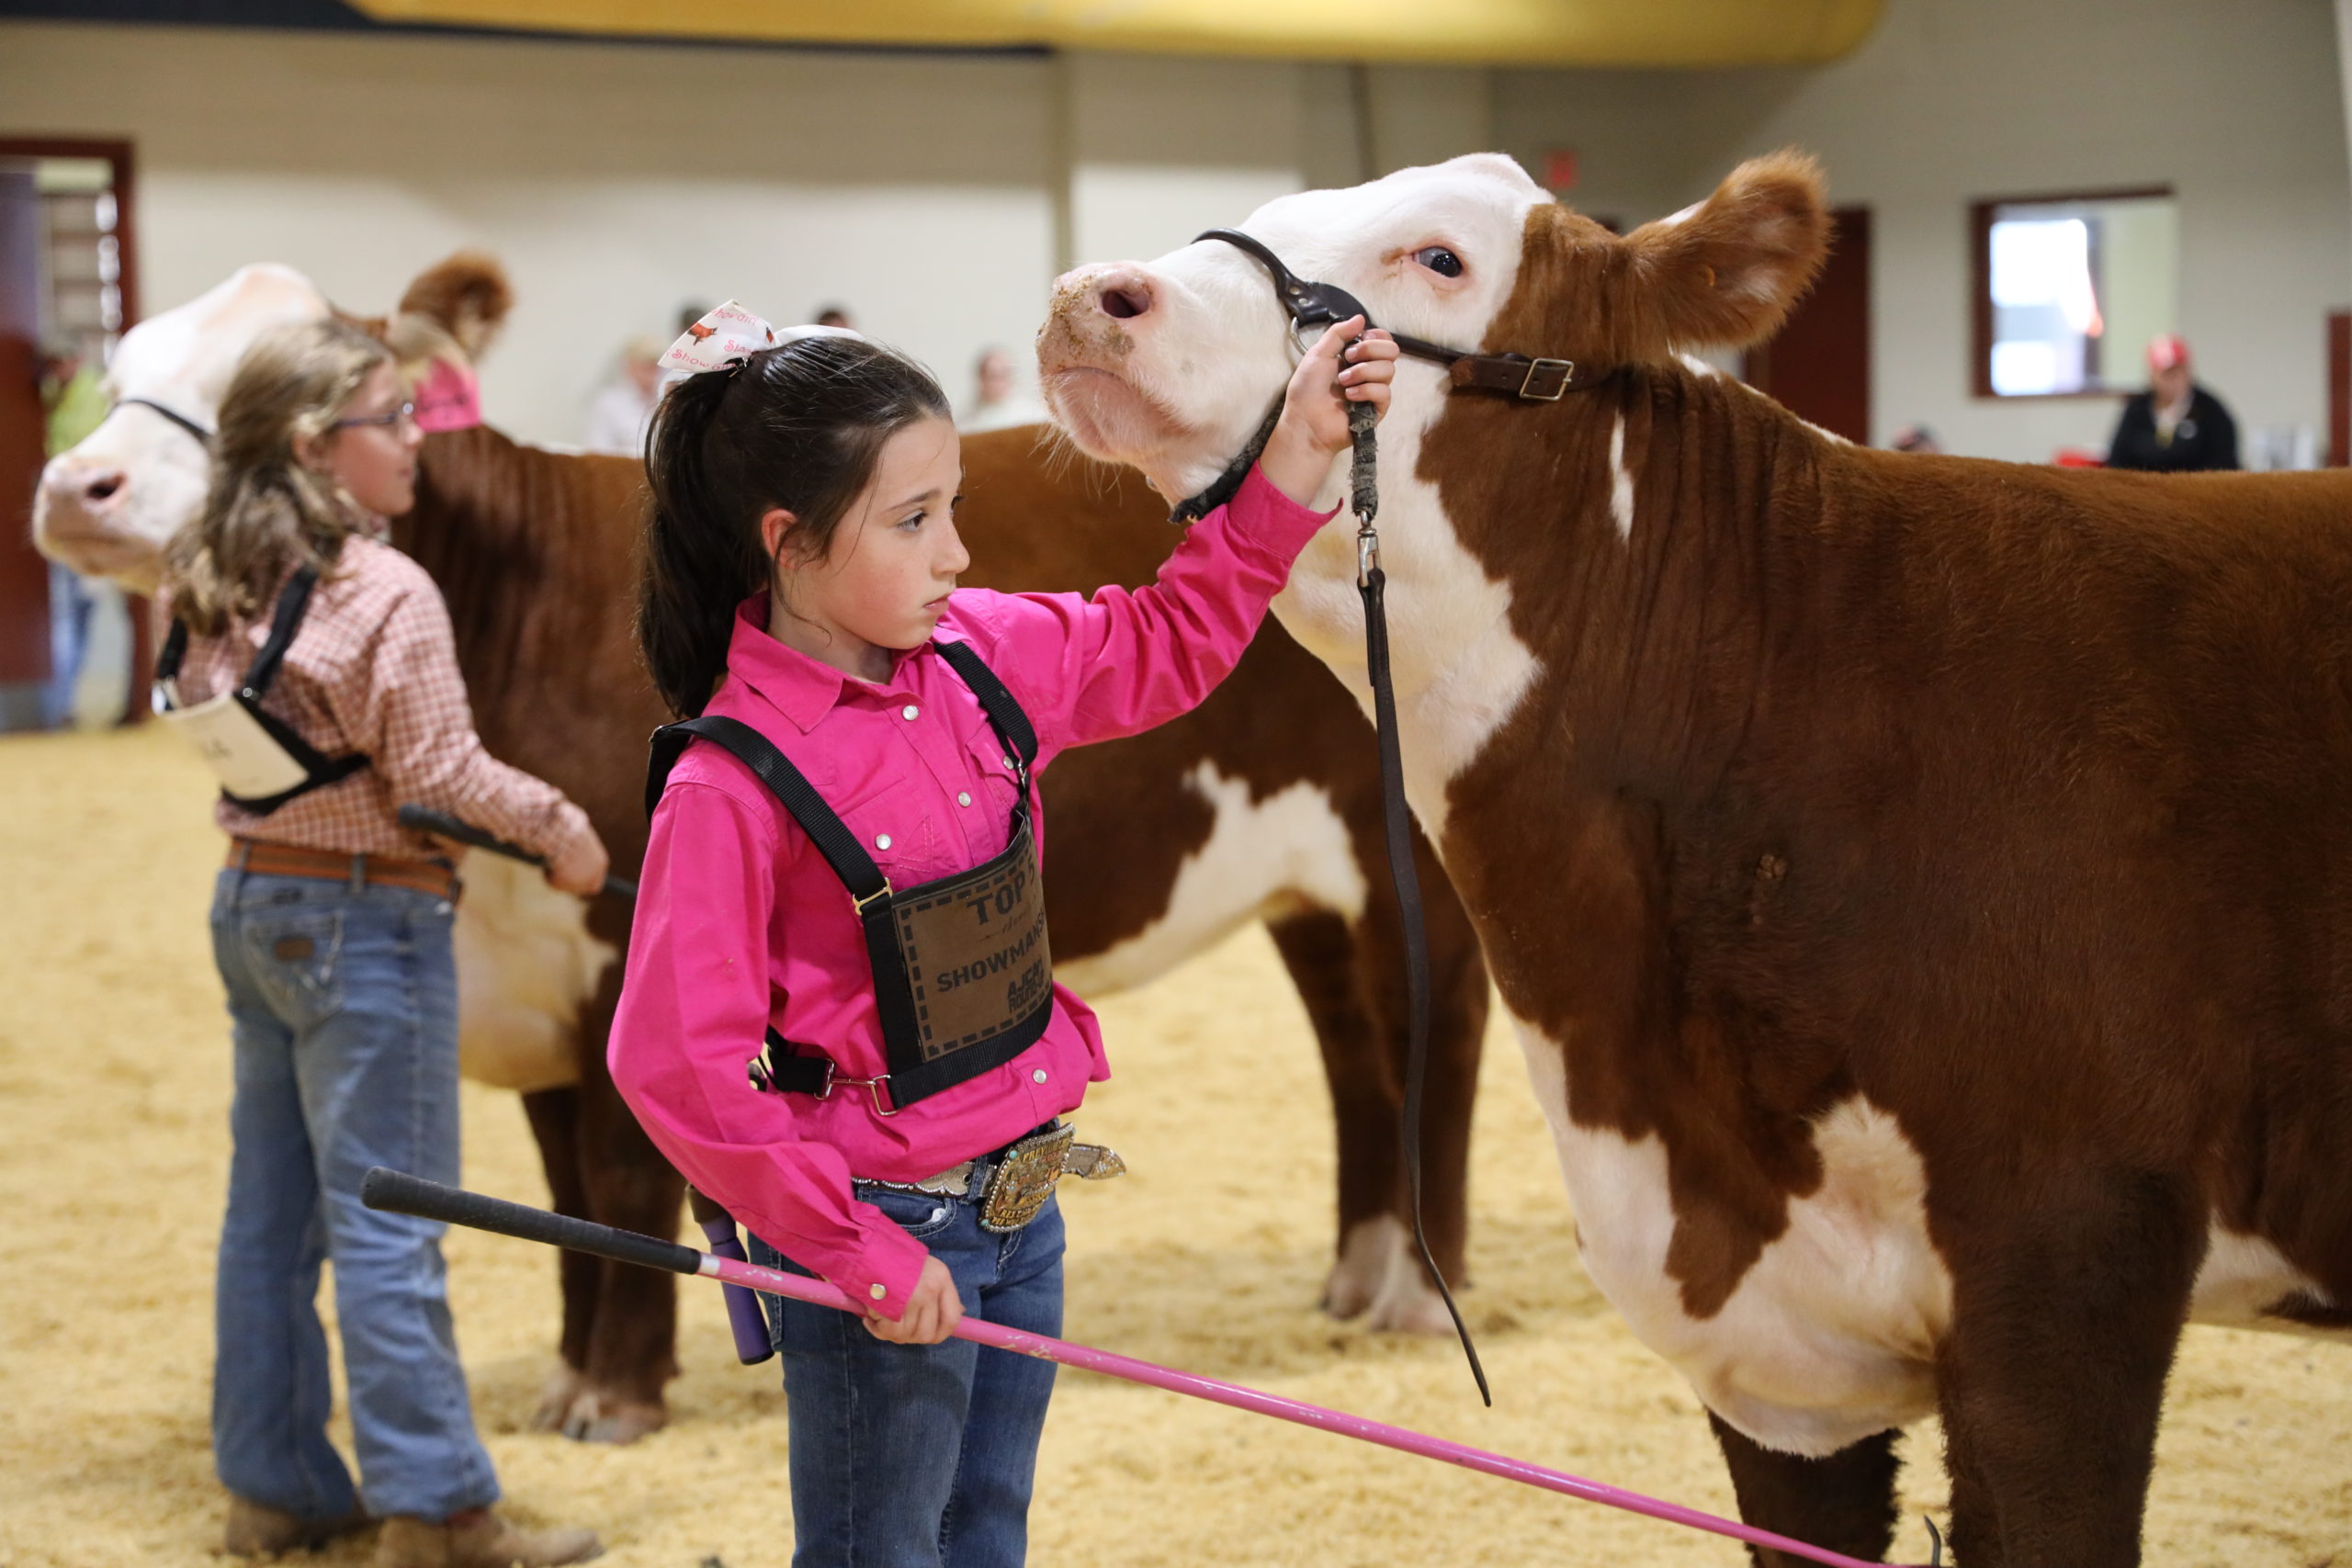 For some families, showing prized livestock at the Big E is a 3